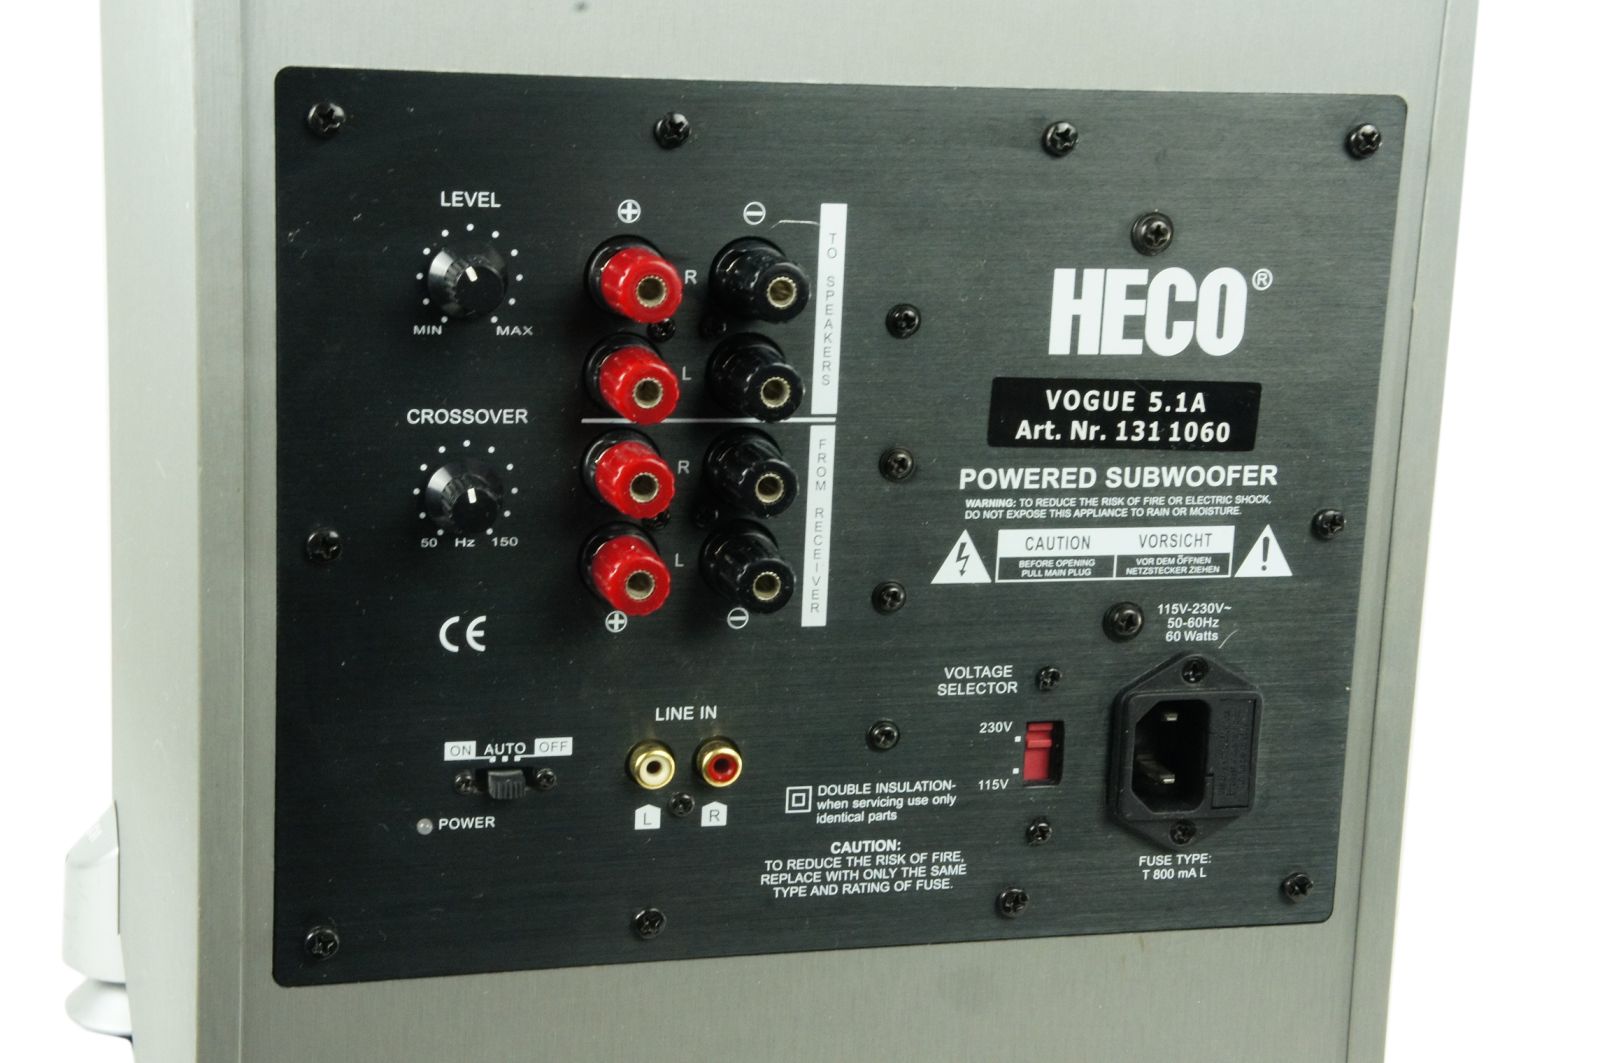 HECO_Powered_Subwoofer_Vogue_5.1A_06